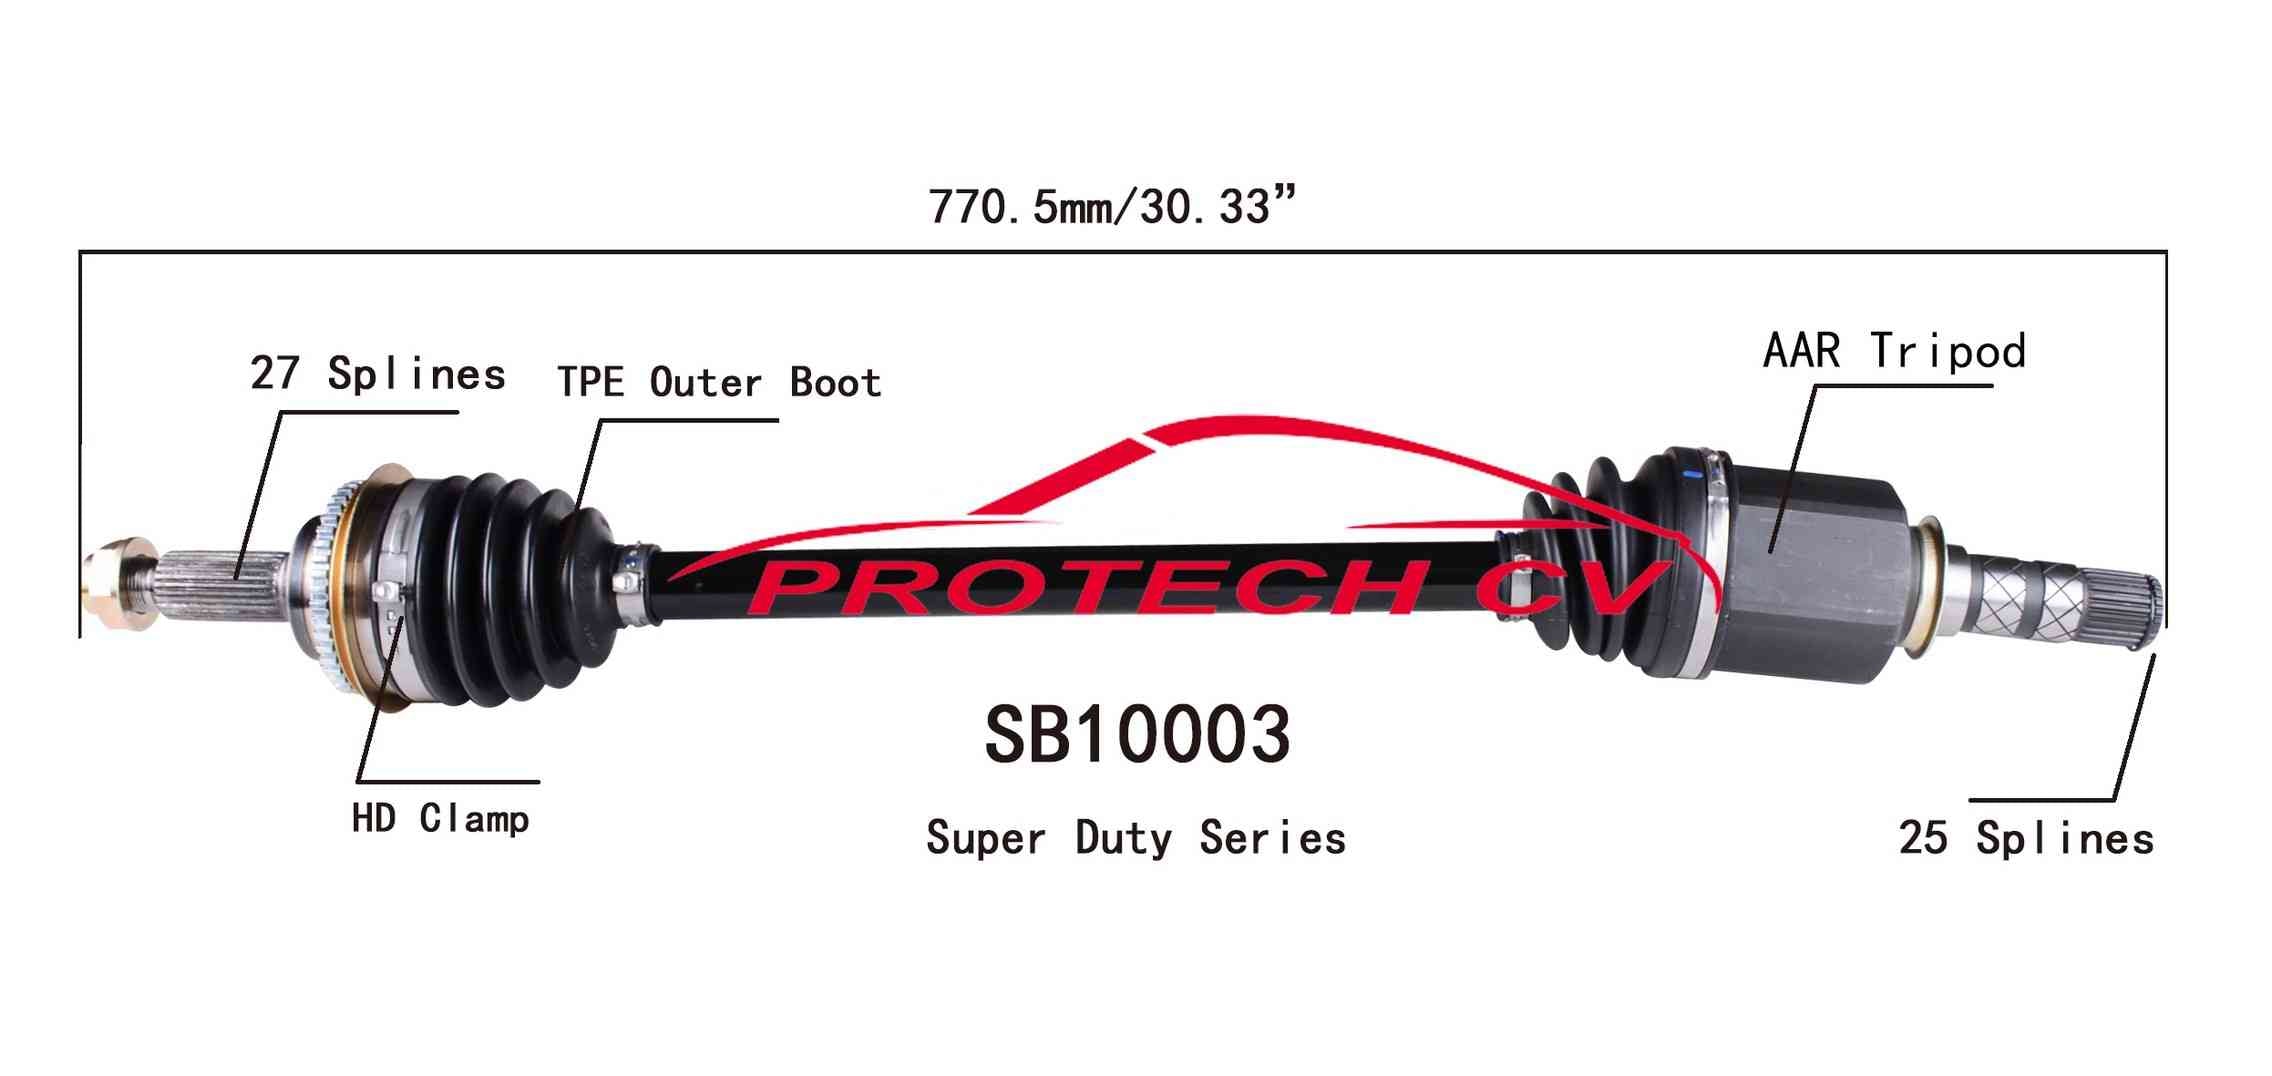 Protech CV **SUPER-DUTY SERIES** TPE BOOT EQUIPPED**  top view frsport SB10003